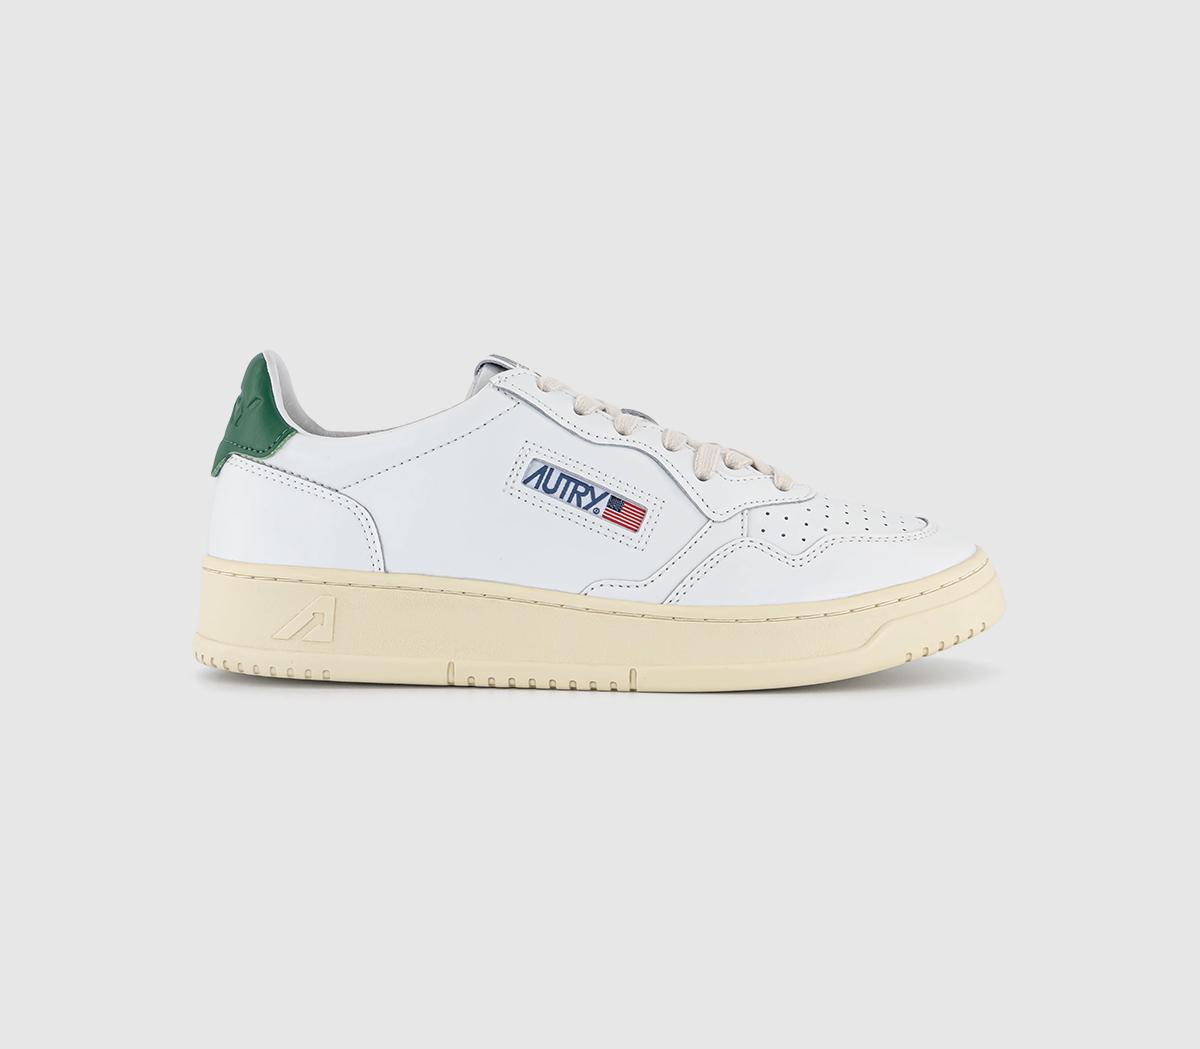 AUTRYMedalist Low TrainersLeather White Green